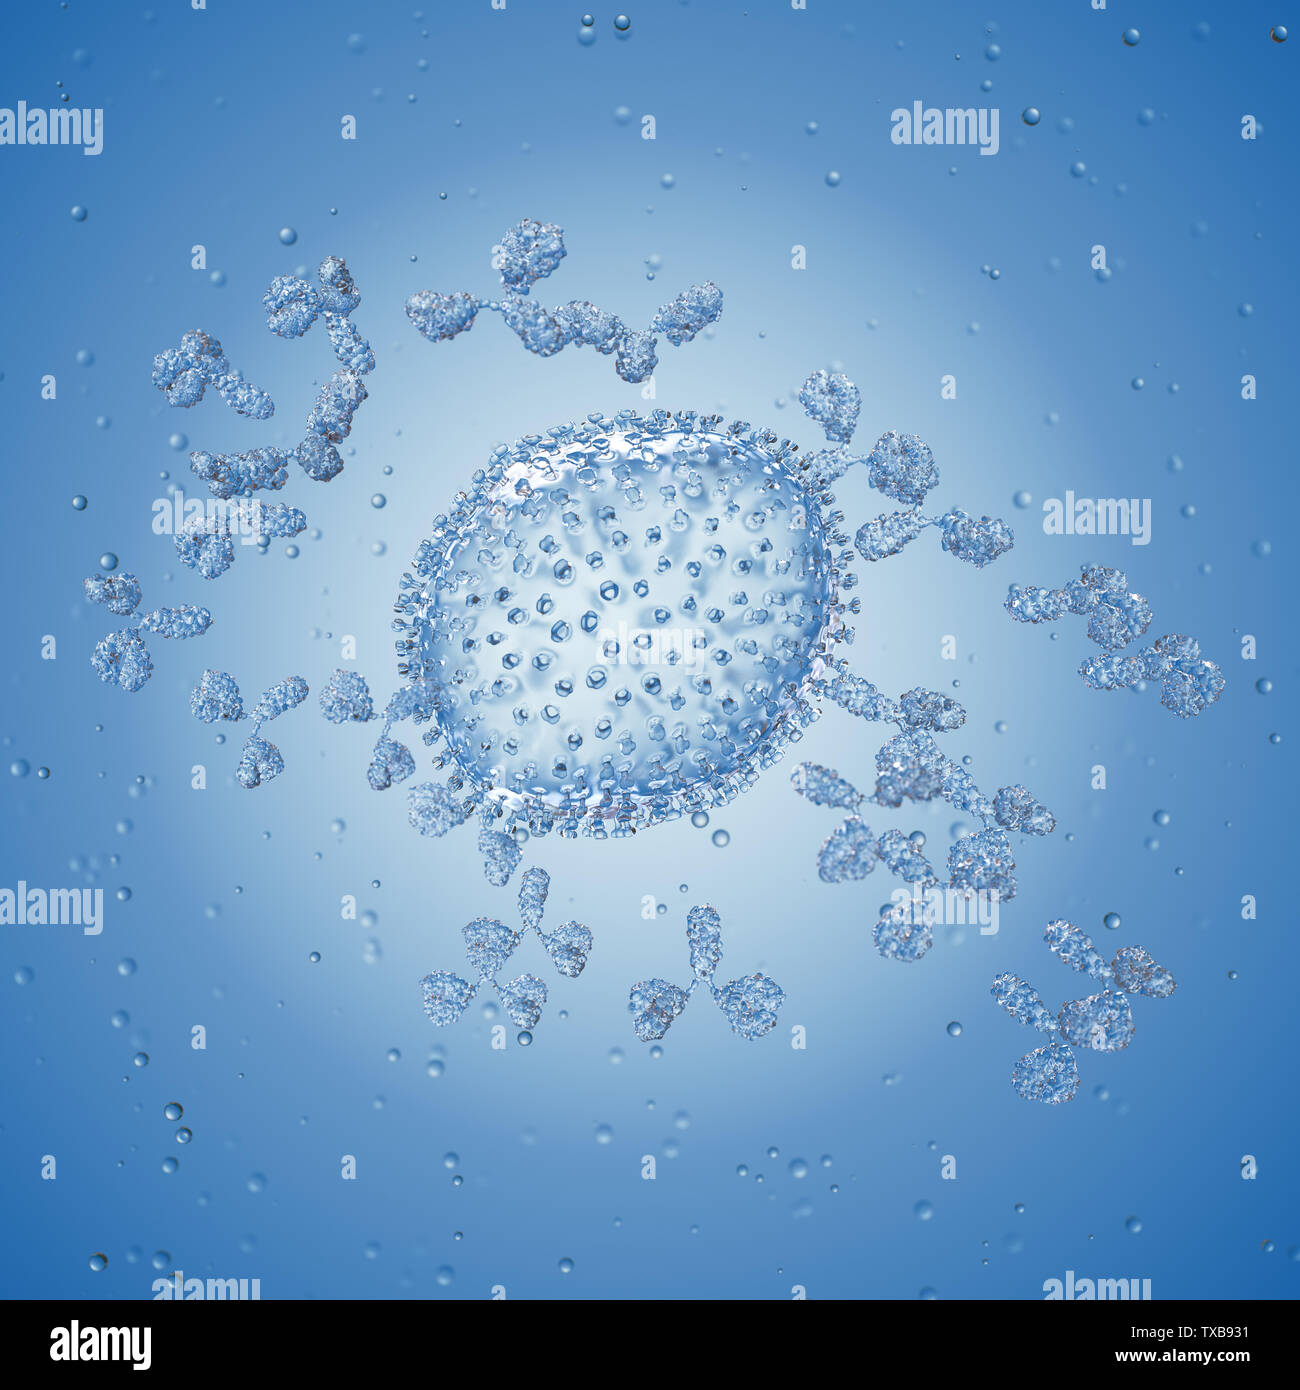 3d rendered medically accurate illustration of antibodies attacking an influenza virus Stock Photo